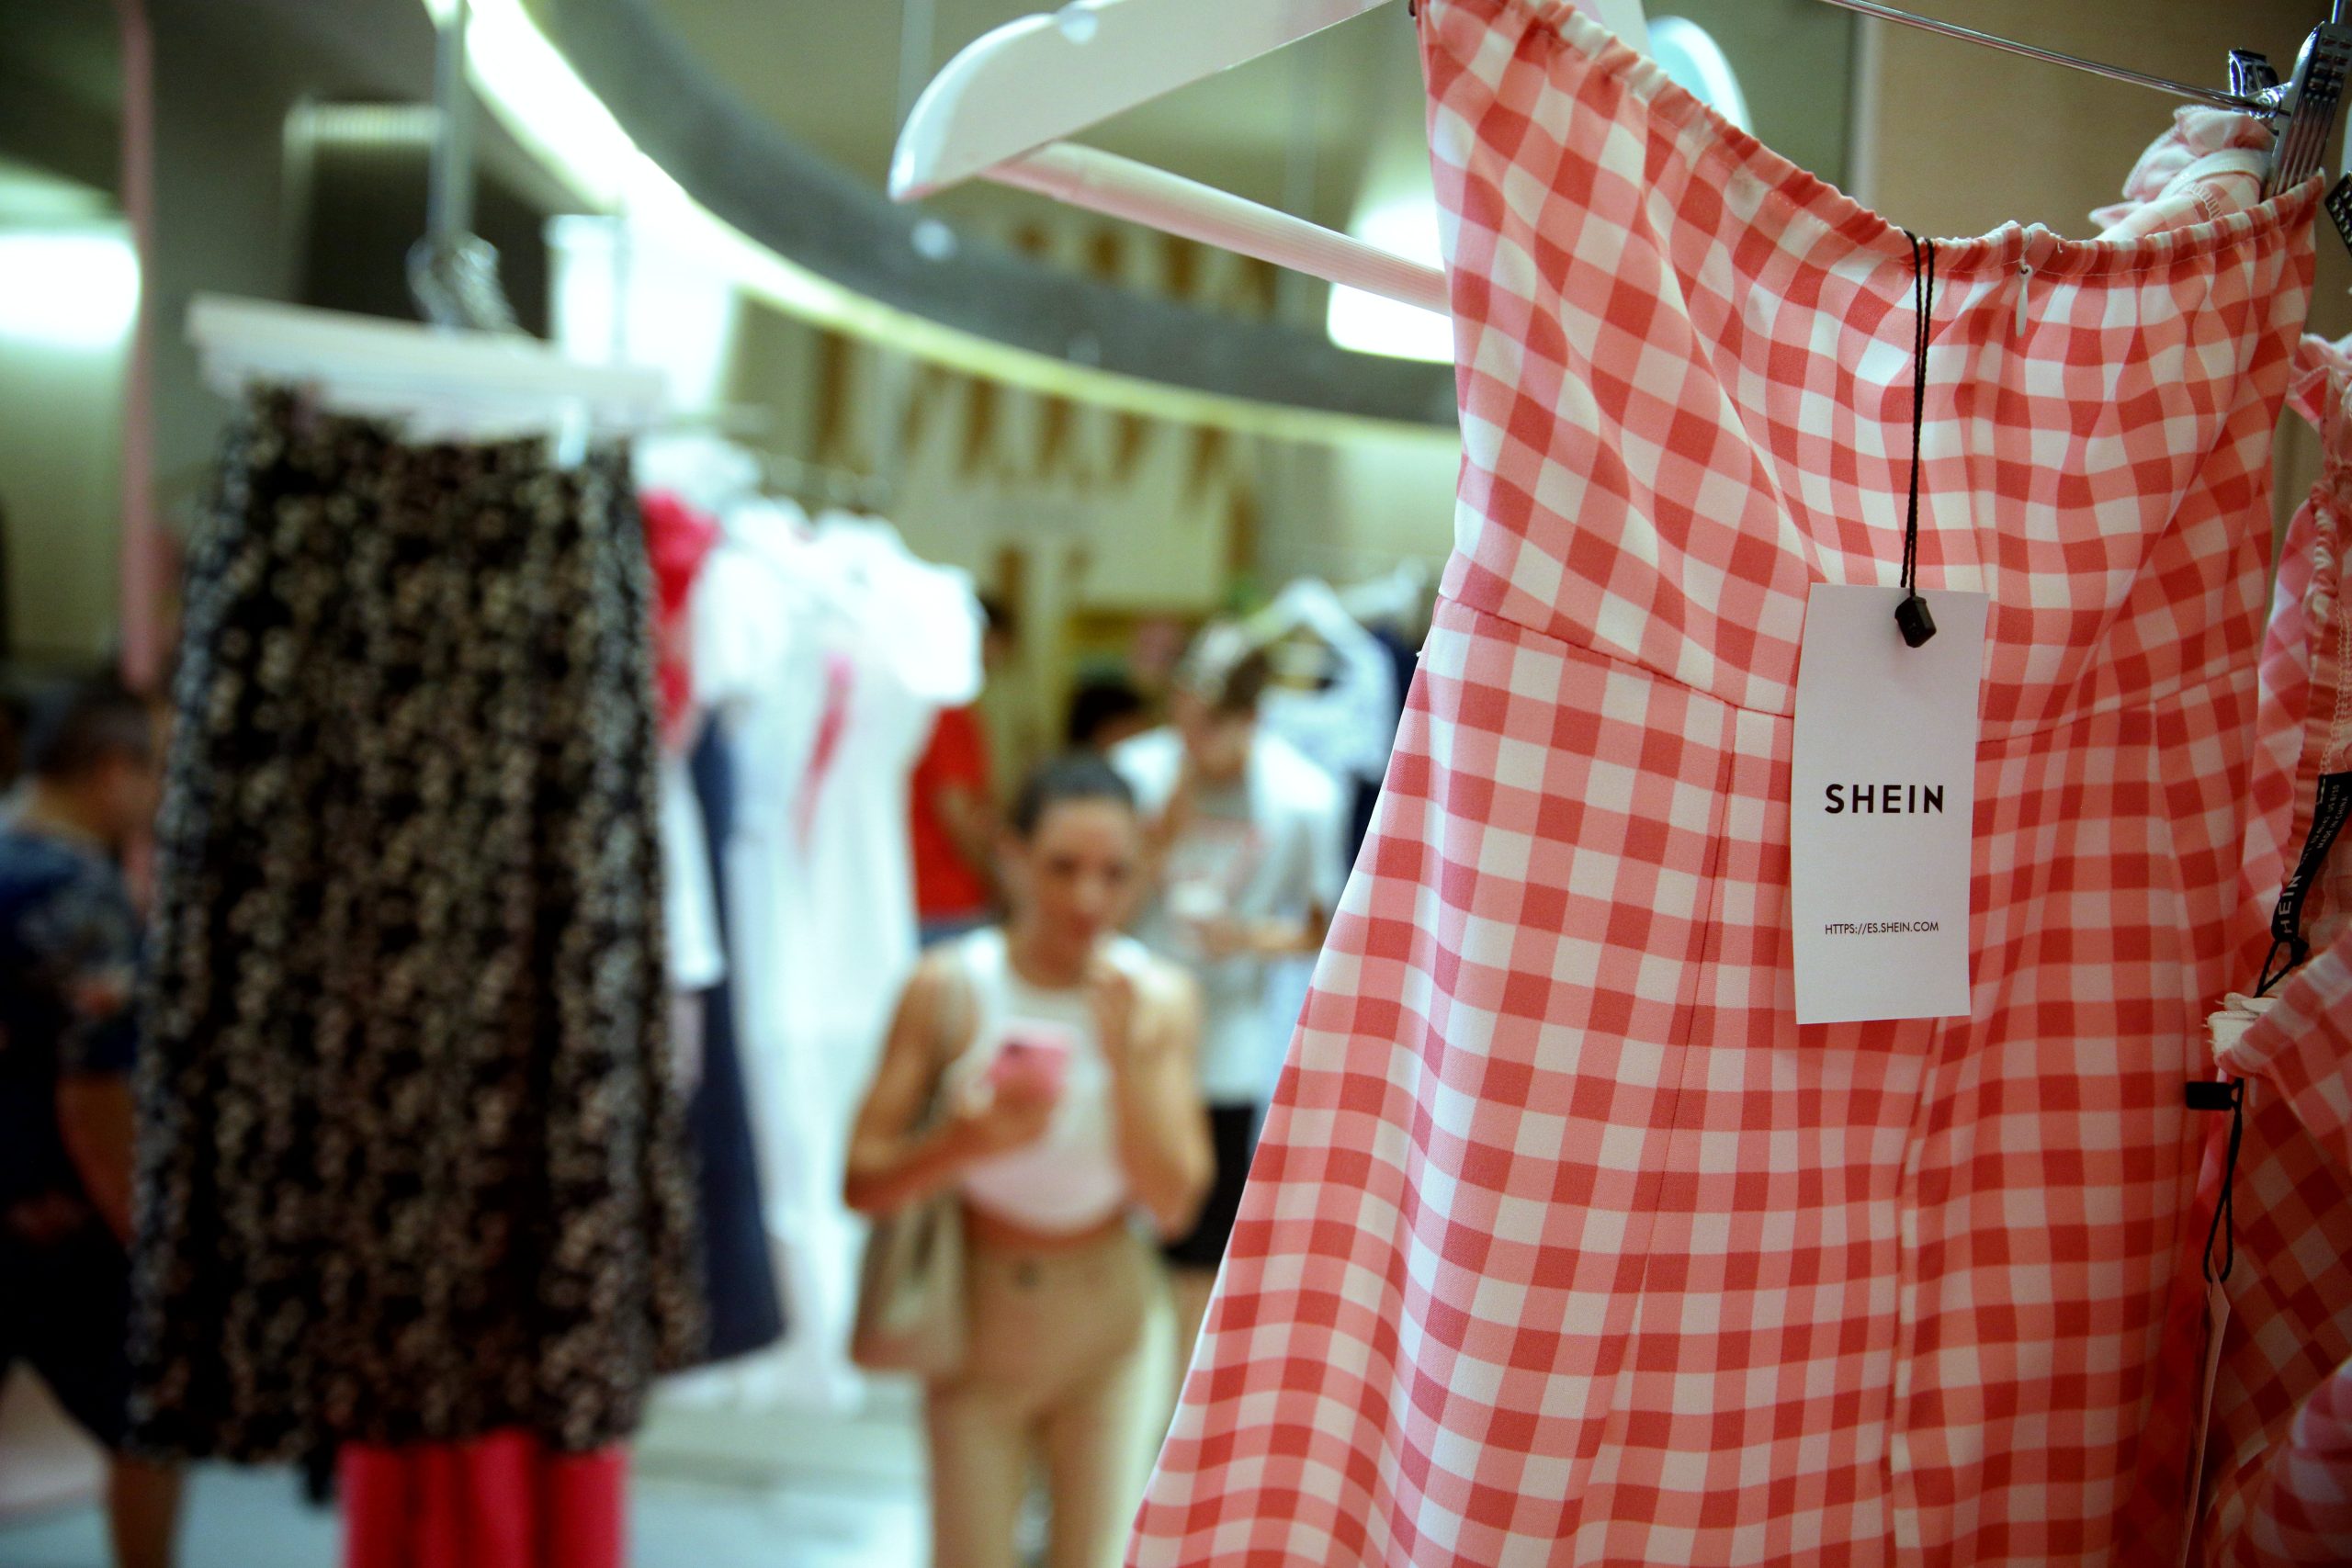 Unauthorized Shein boutiques are popping up across Mexico - Rest of World